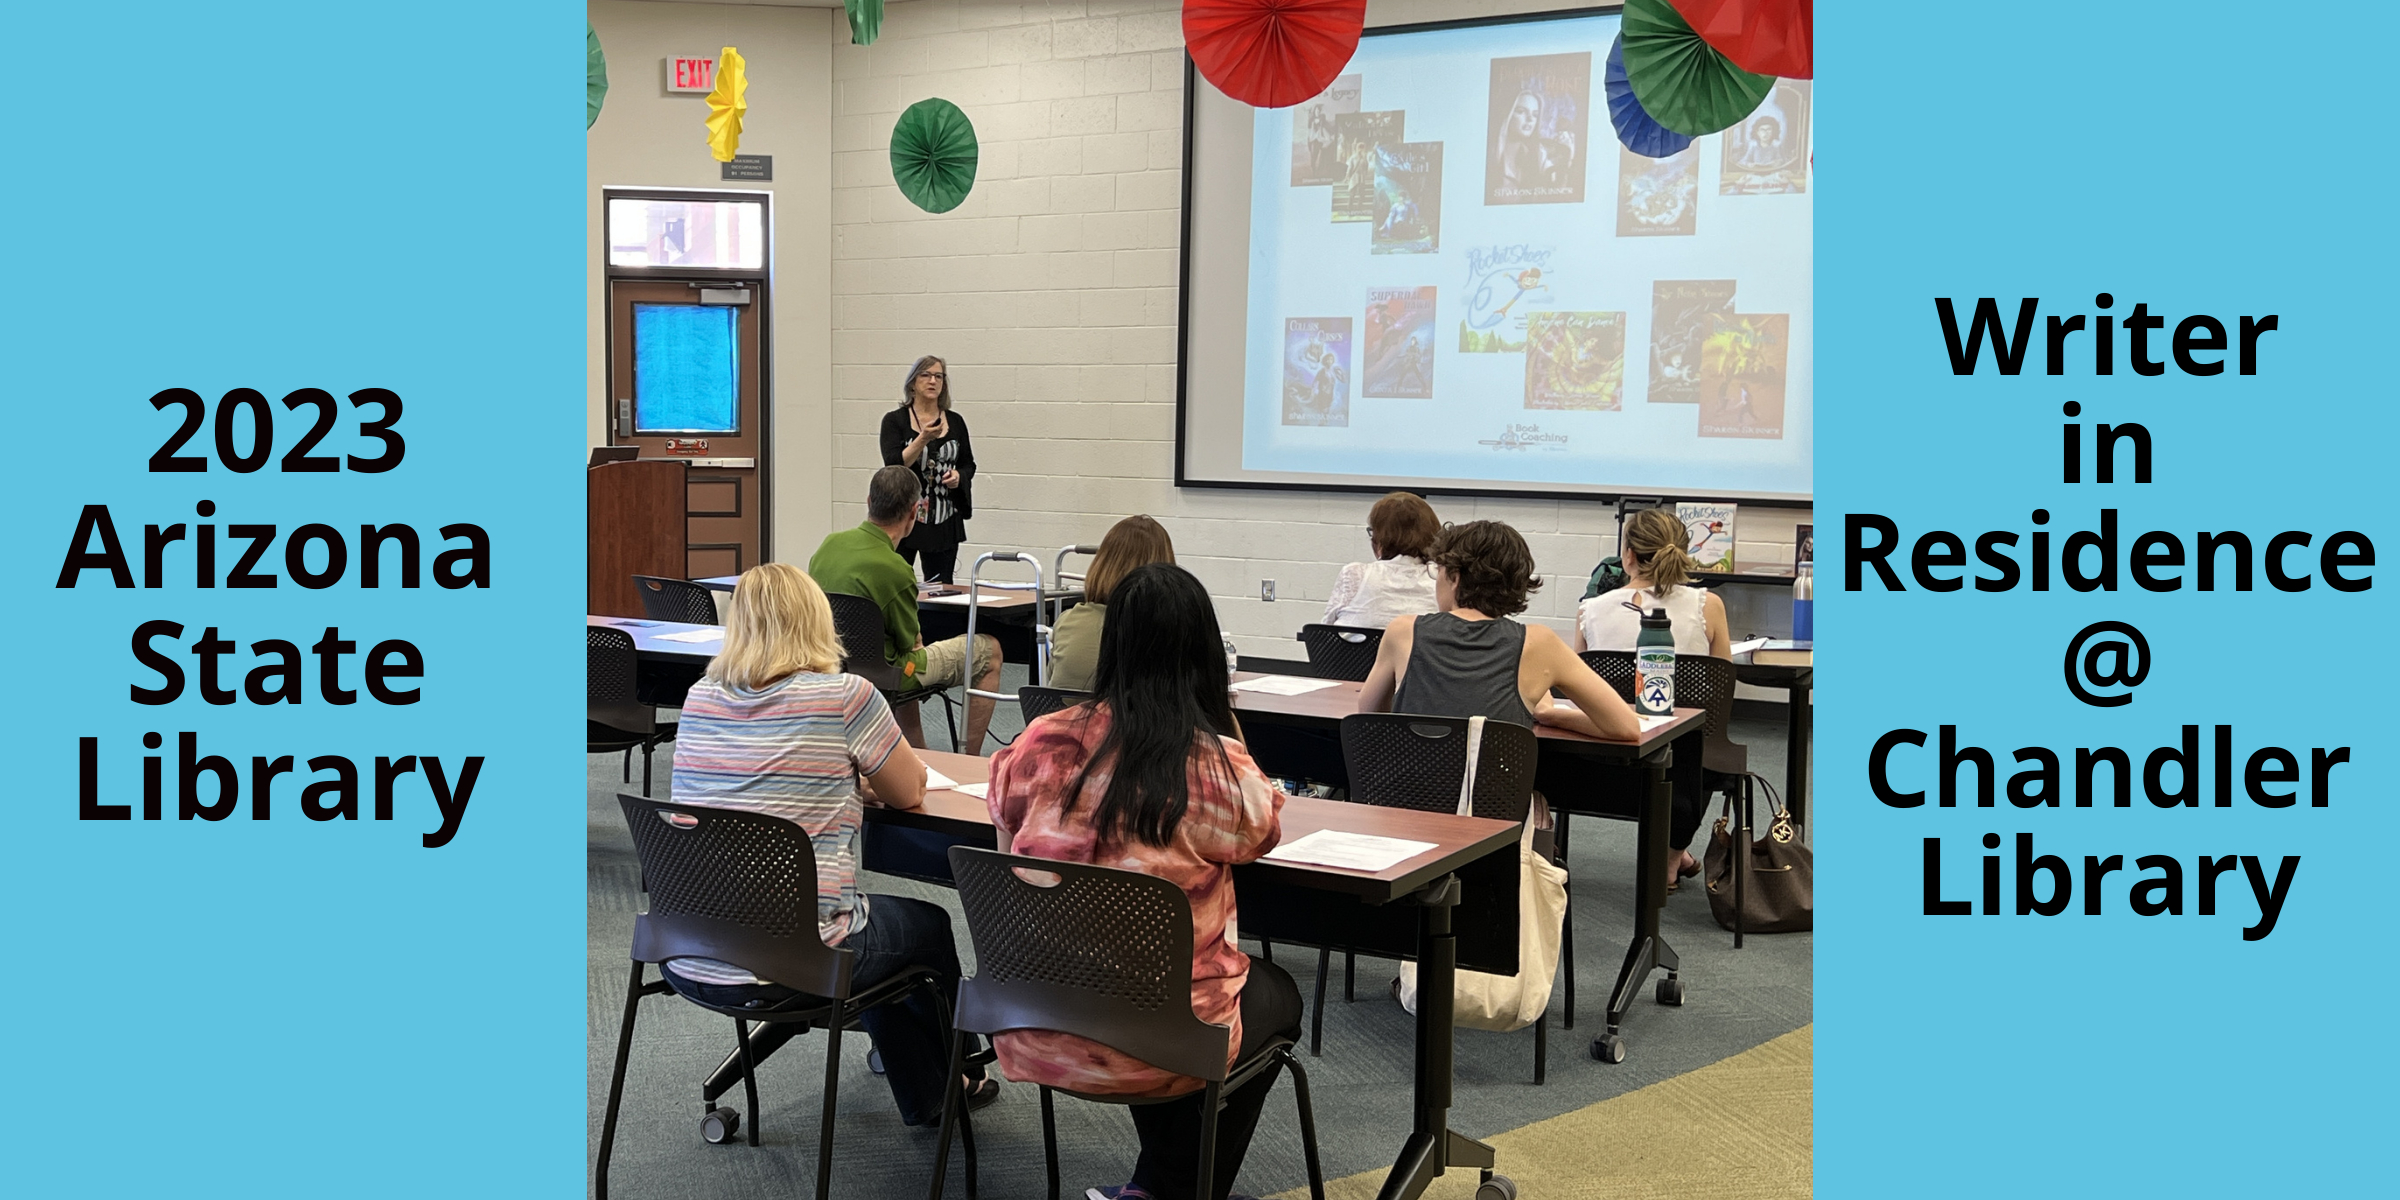 2023 AZ State Writer in Residence @ Chandler Library: Sharon teaching a writing workshop